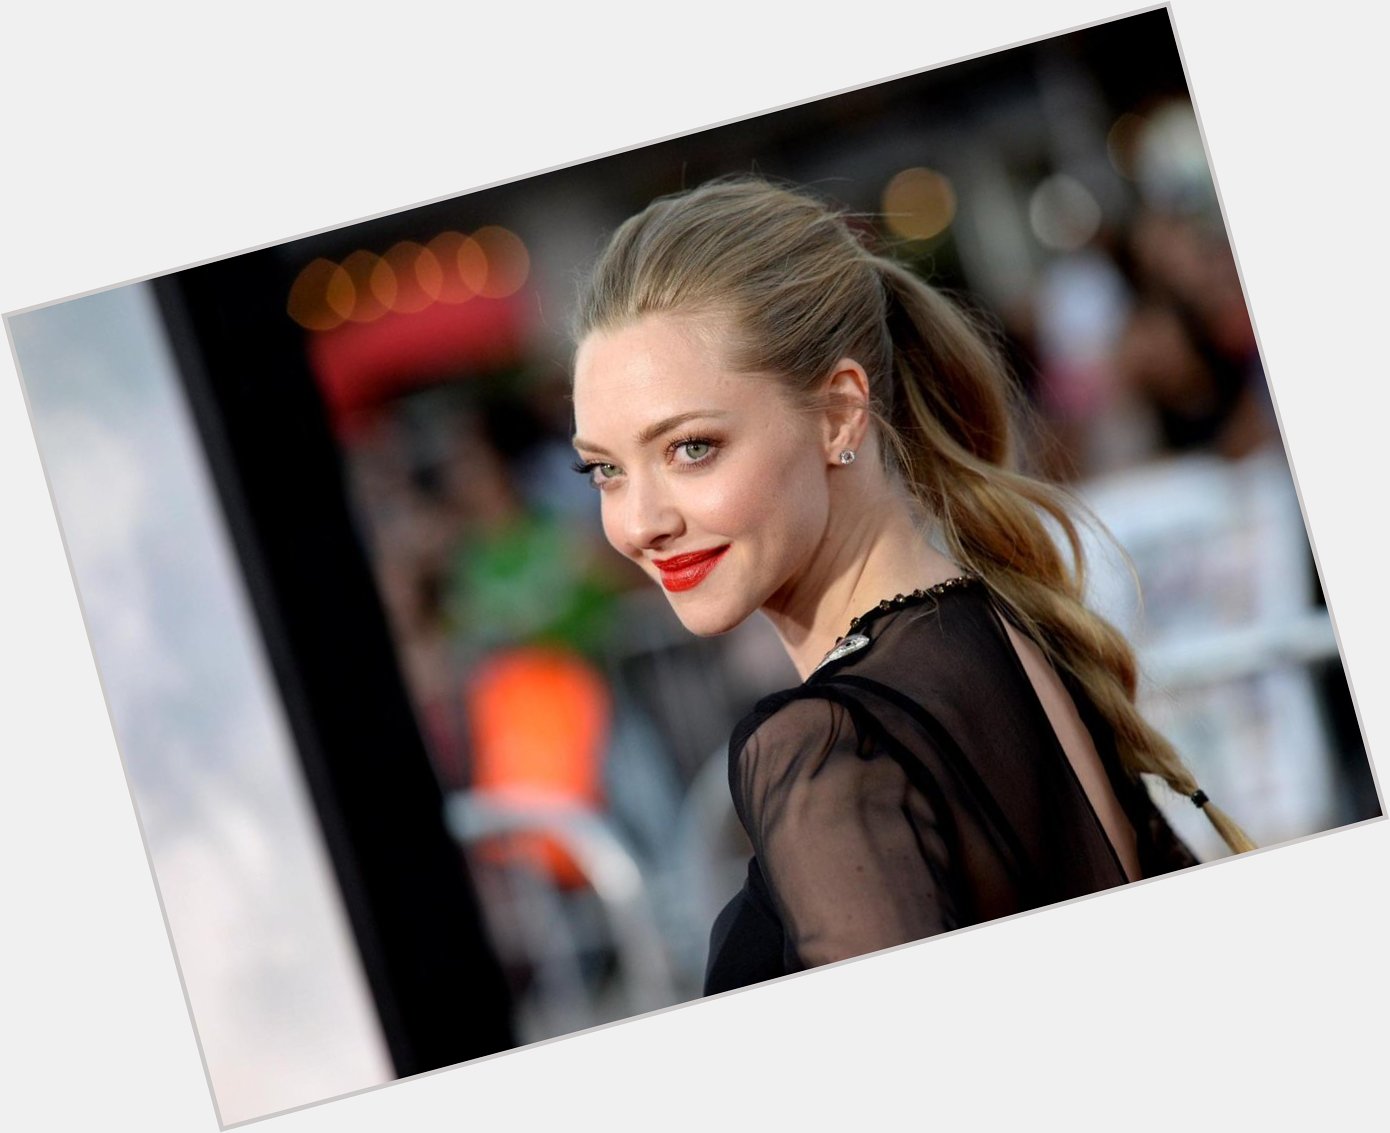 Happy birthday, Amanda Seyfried! The gorgeous and talented American actress turns 34 today.

© Getty/REX 